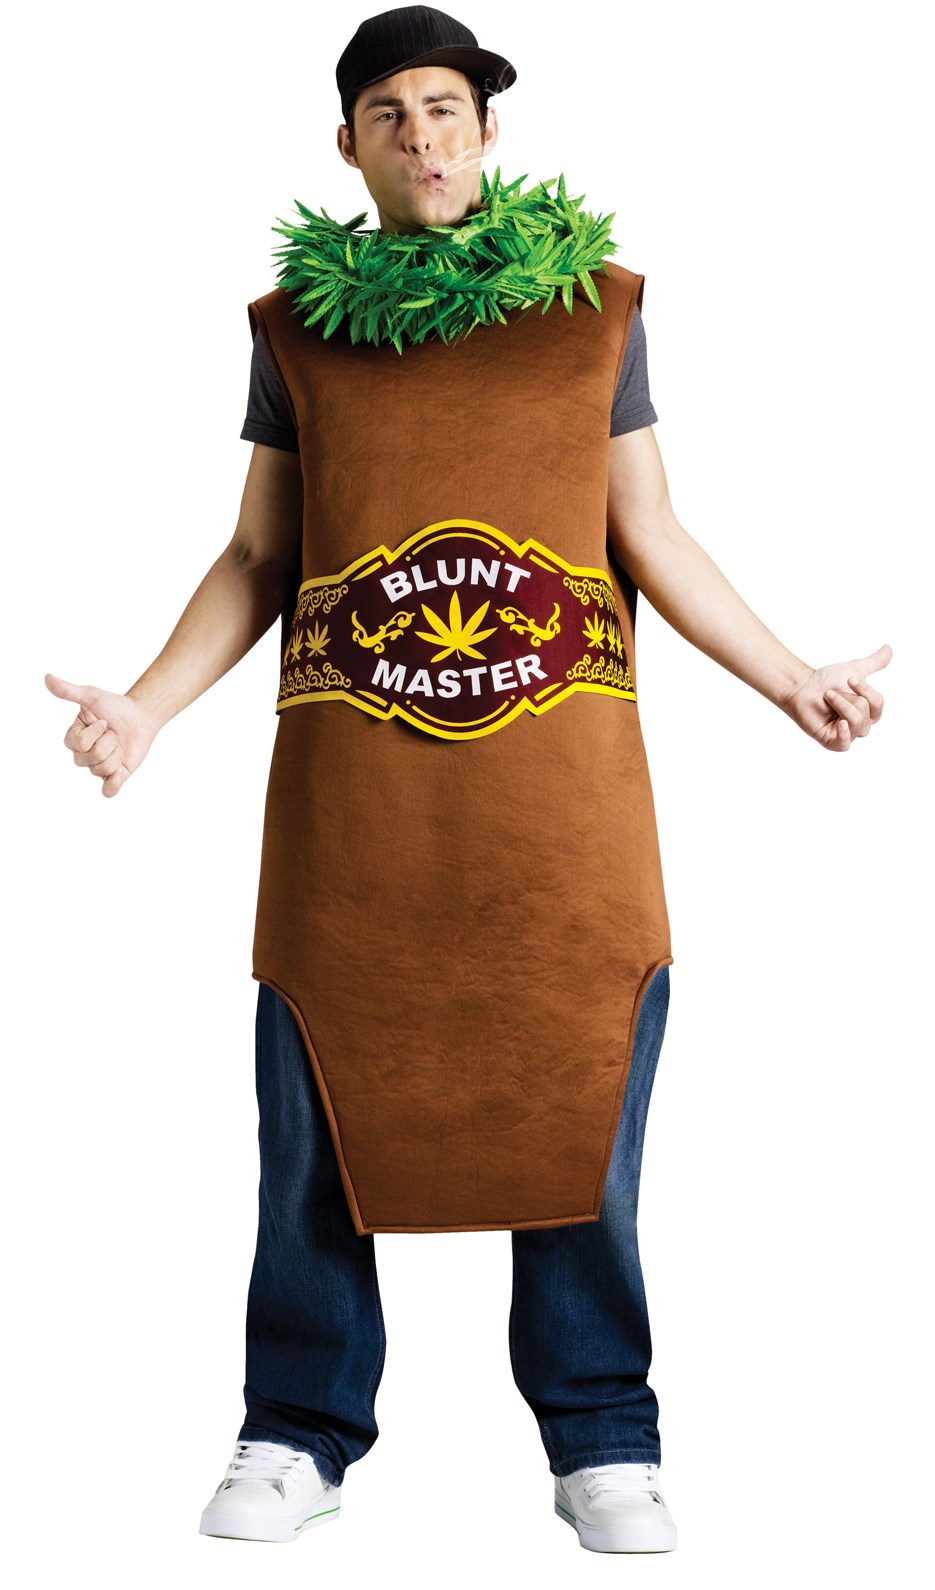 Blunt Master Joint Adult Costume